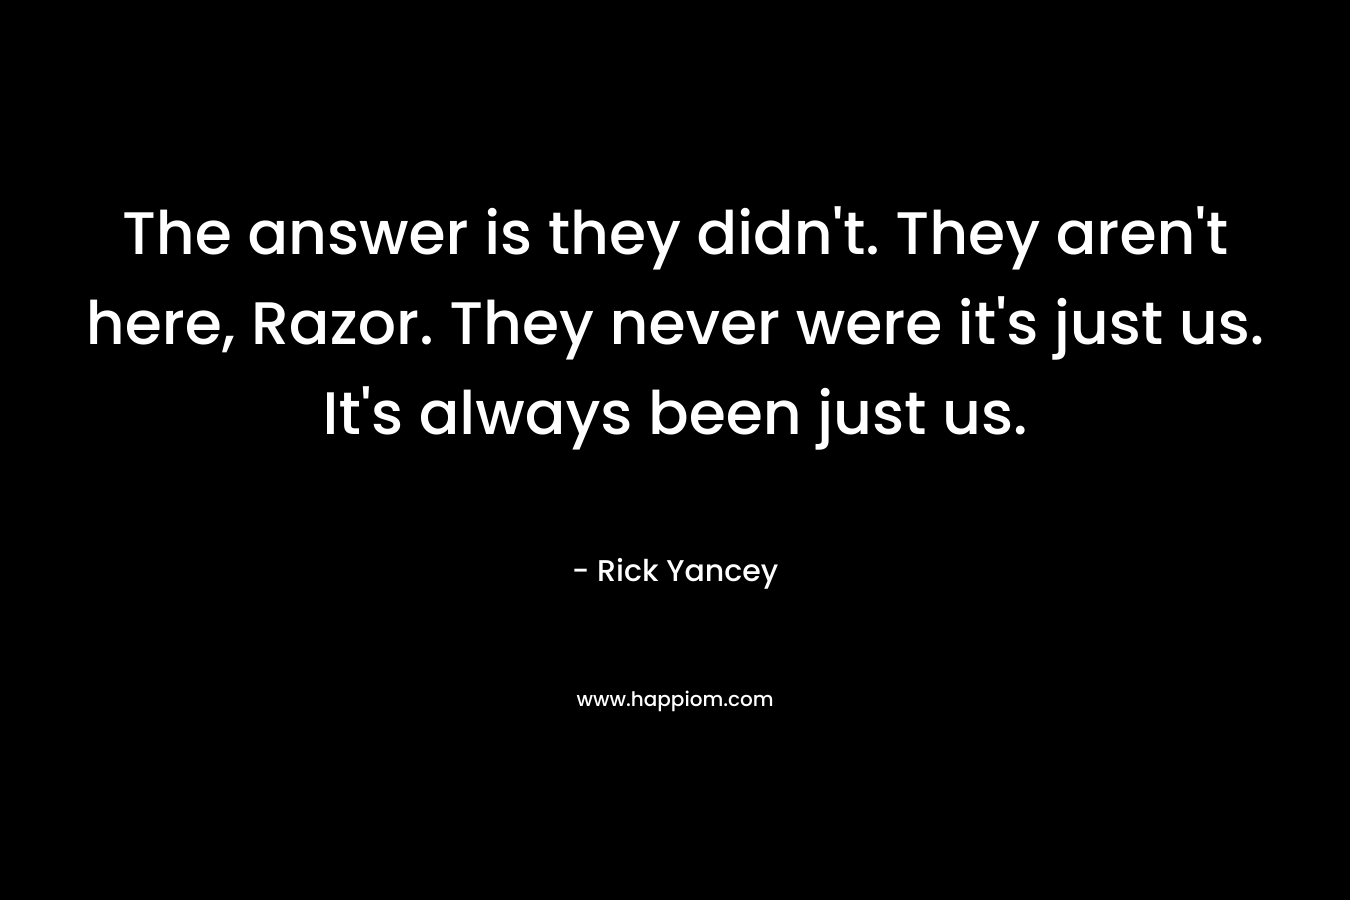 The answer is they didn't. They aren't here, Razor. They never were it's just us. It's always been just us.